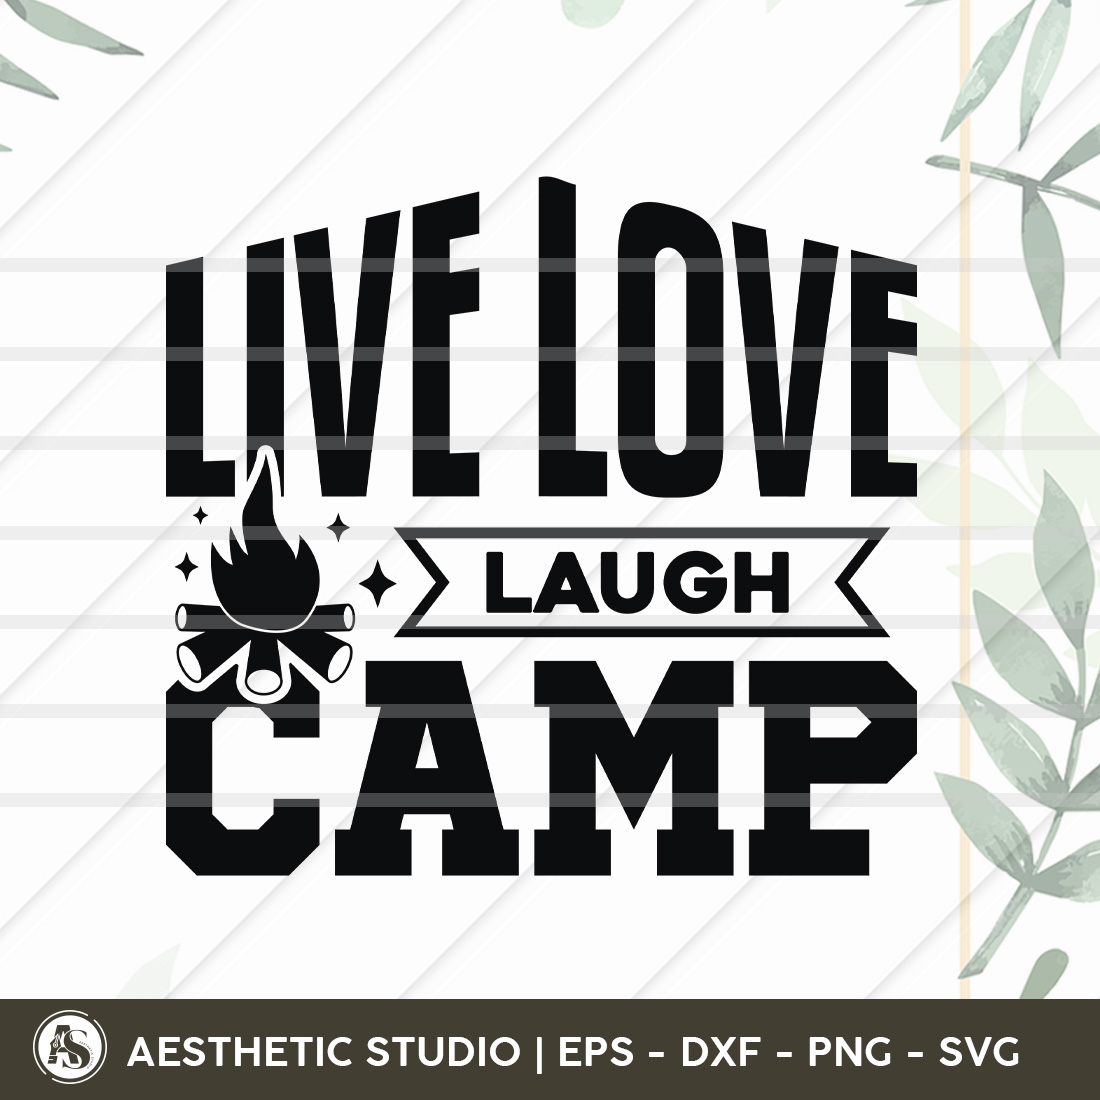 Live Love Laugh Camp, Adventure, Camp Life, Camping Svg, Typography, Camping Quotes, Camping Cut File, Funny Camping, Camping T-shirt Design, Svg, Eps, Dxf, Png, Cut file cover image.